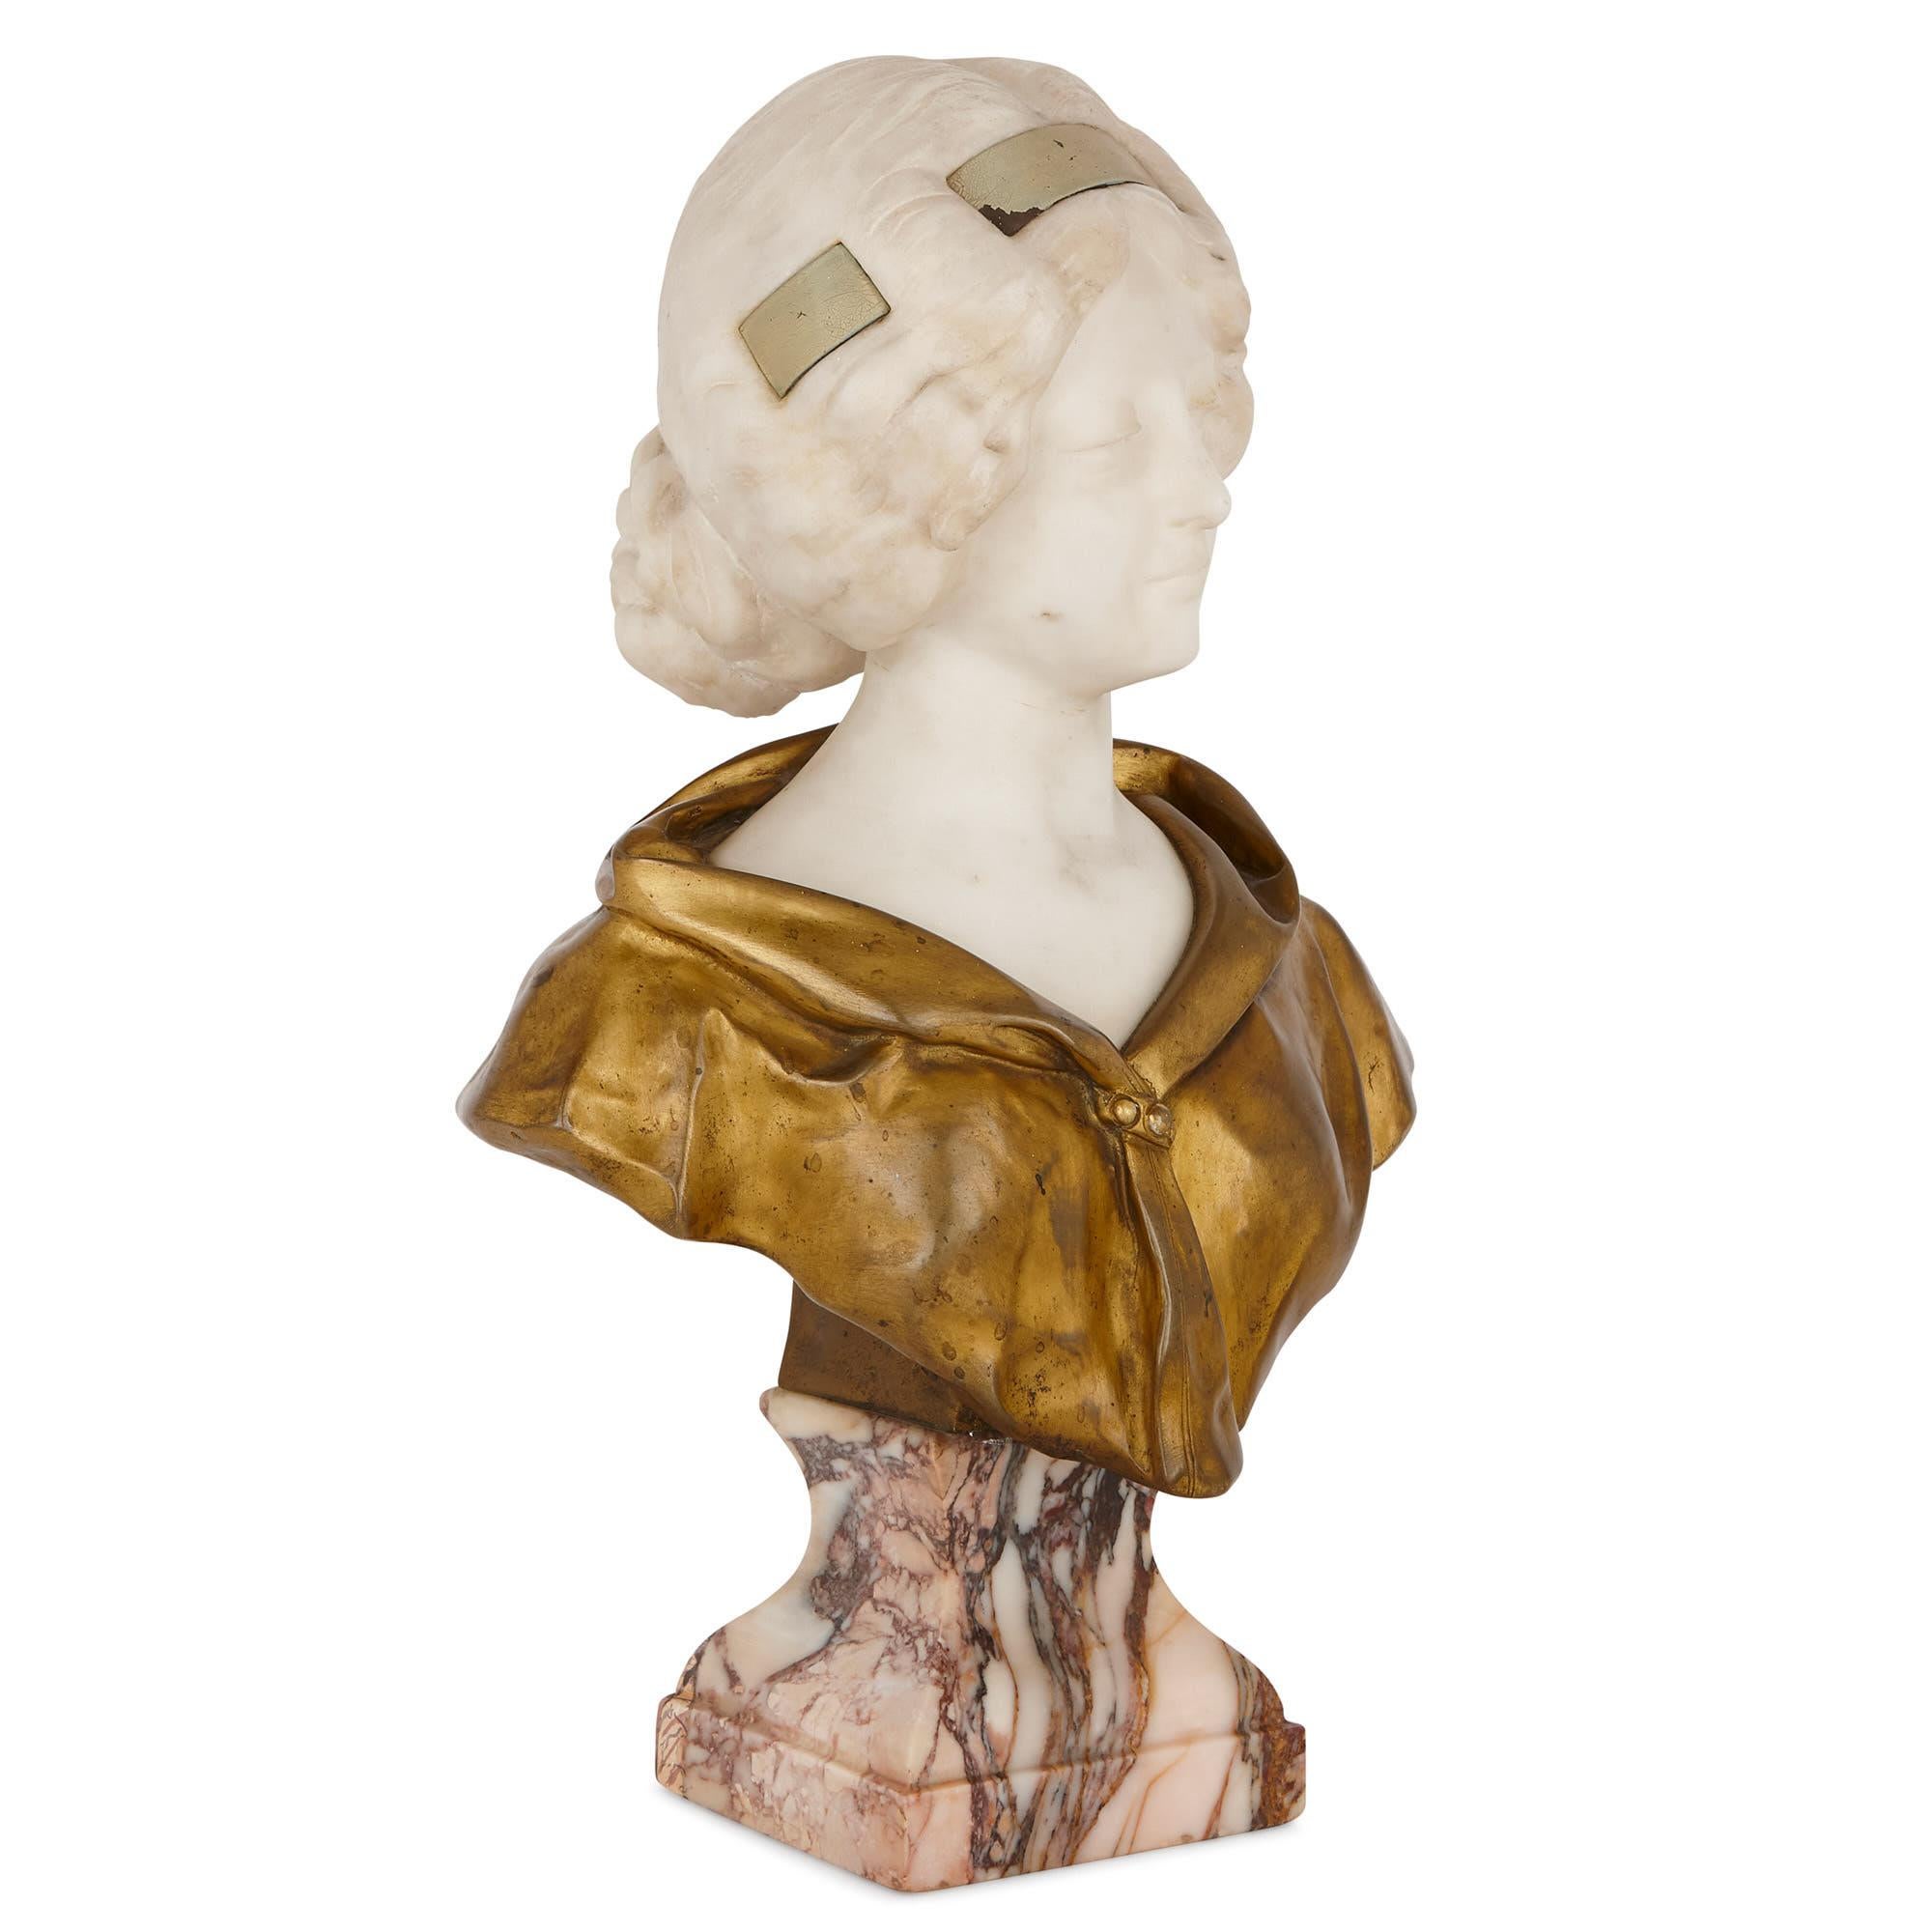 This charming sculpture of a young woman is the work of the accomplished Italian-born sculptor, Affortunato Gory (1895-1925). Gory is best-known for his sculptures of women and children, which are often crafted from a combination of marble, gilt